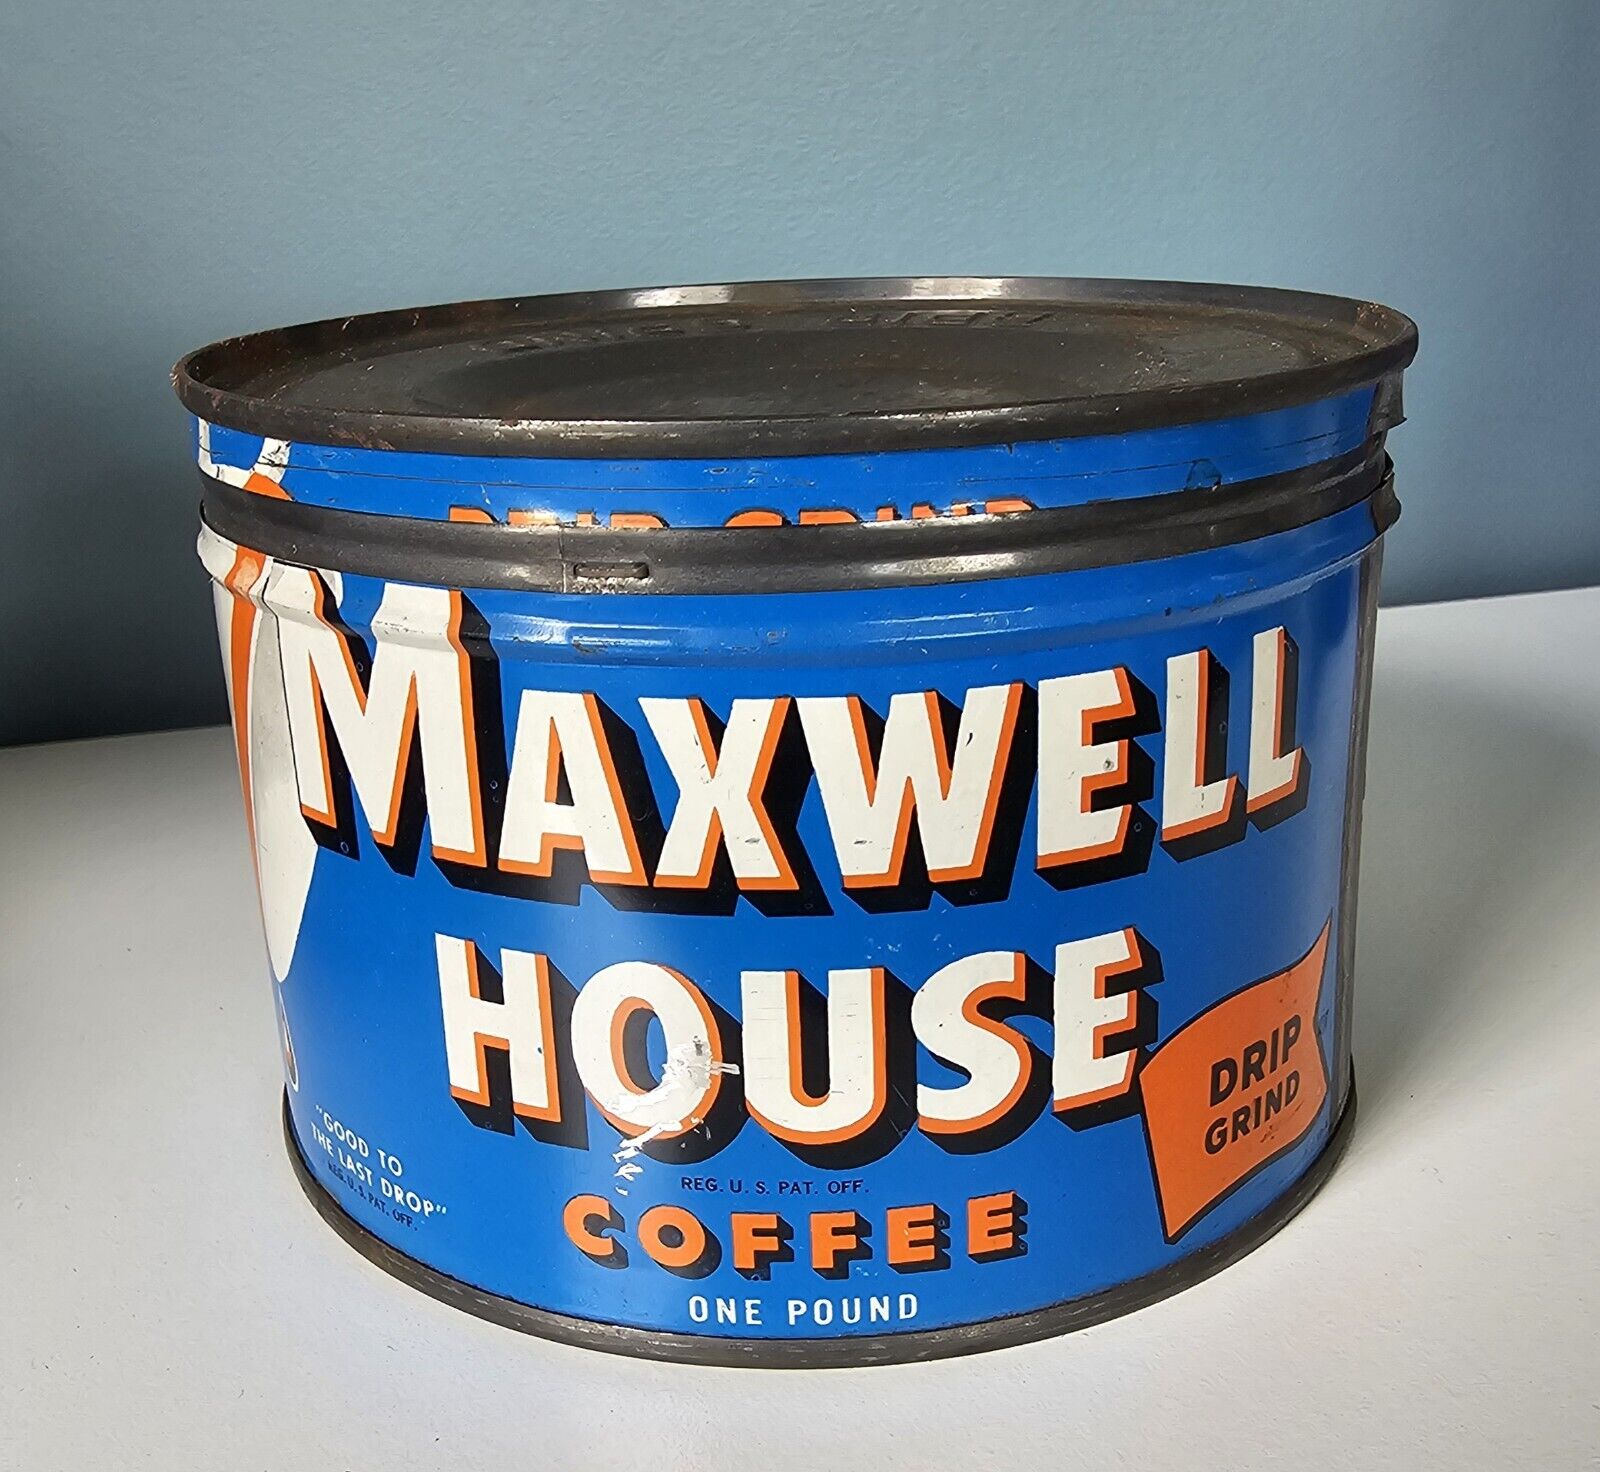 Vintage Maxwell House Coffee Tin. Key Wind. 1 Pound Can with Lid. Drip Grind